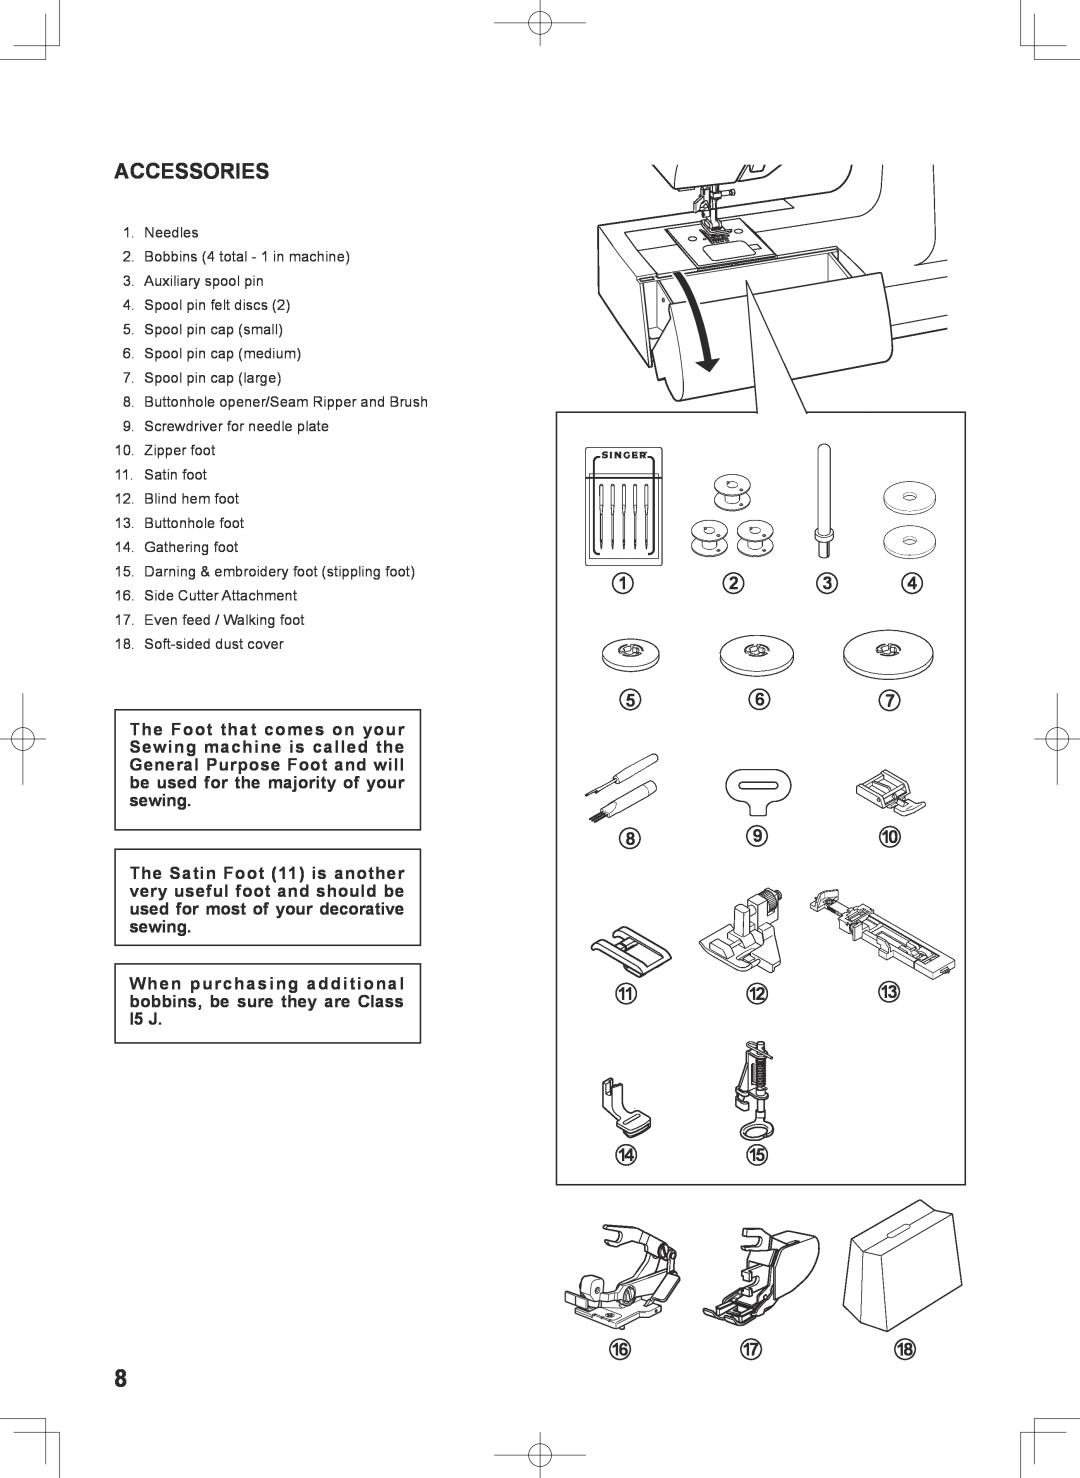 Singer 7467S instruction manual Accessories, When purchasing additional bobbins, be sure they are Class I5 J 